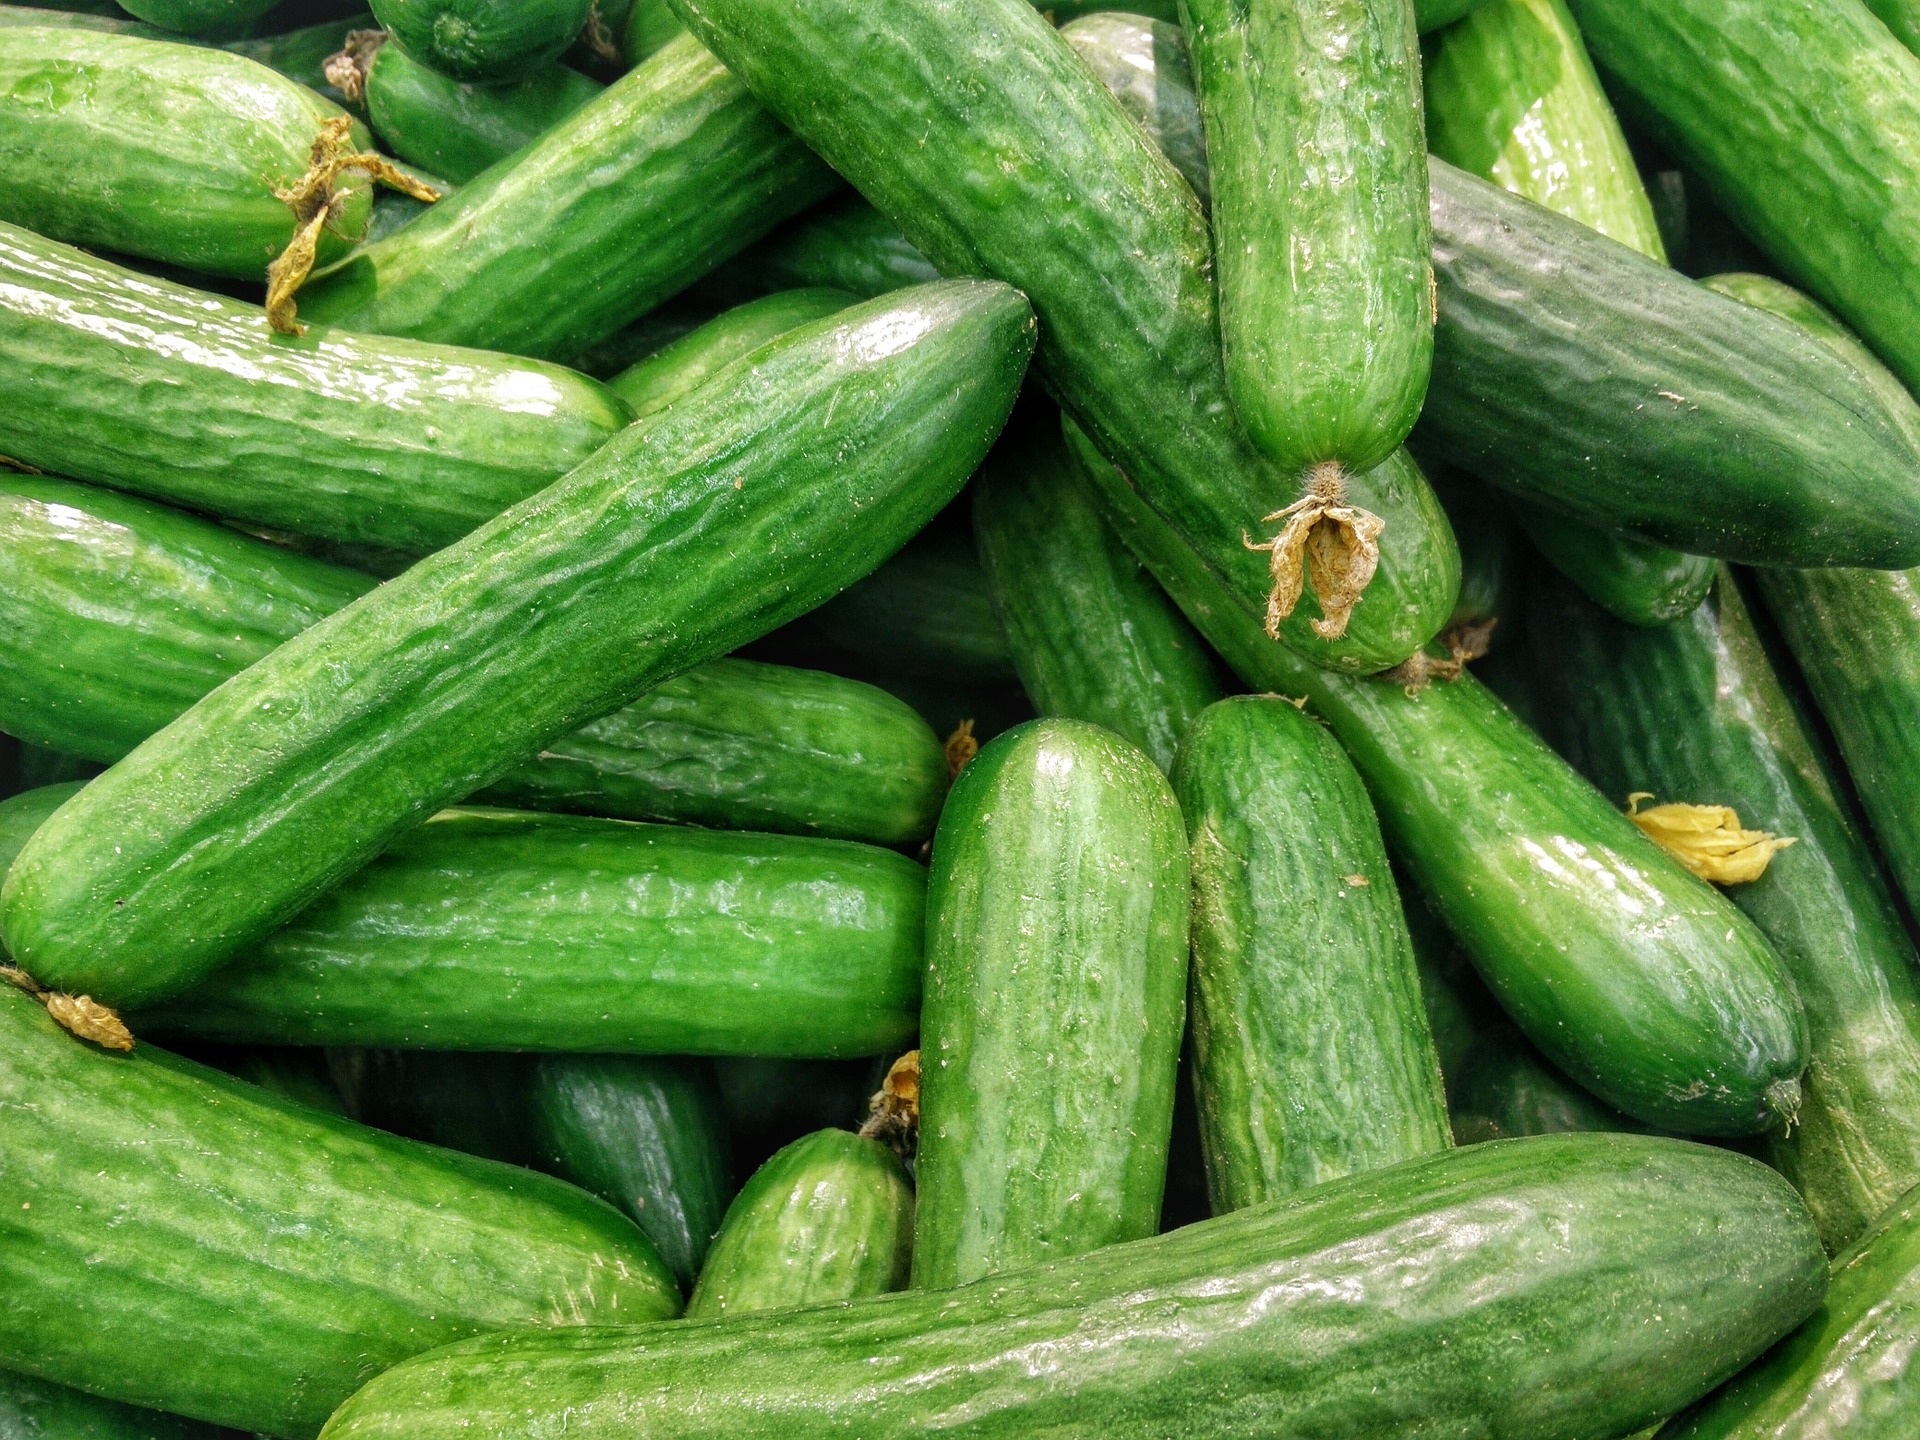 Cucumbers: Planting, Growing, and Harvesting Cucumbers | The Old Farmer